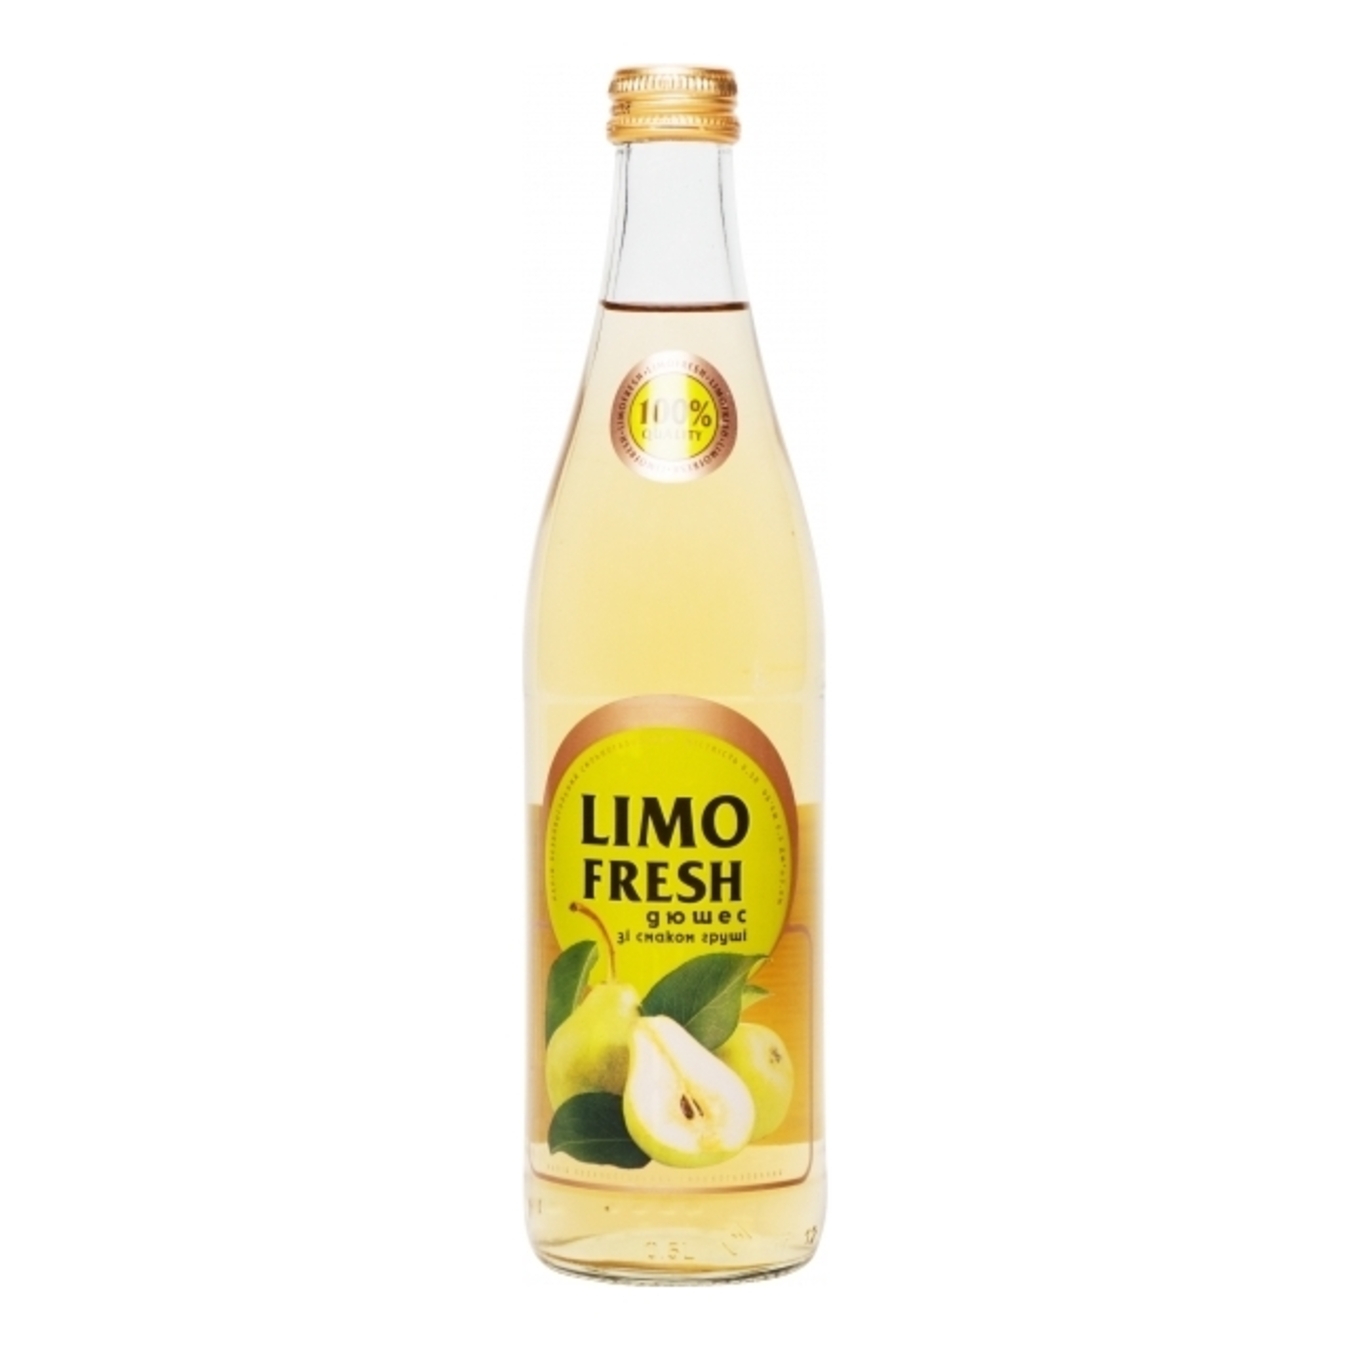 Non-alcoholic Strong carbonated Drink Limofresh dyushes with pear flavor 0,5l